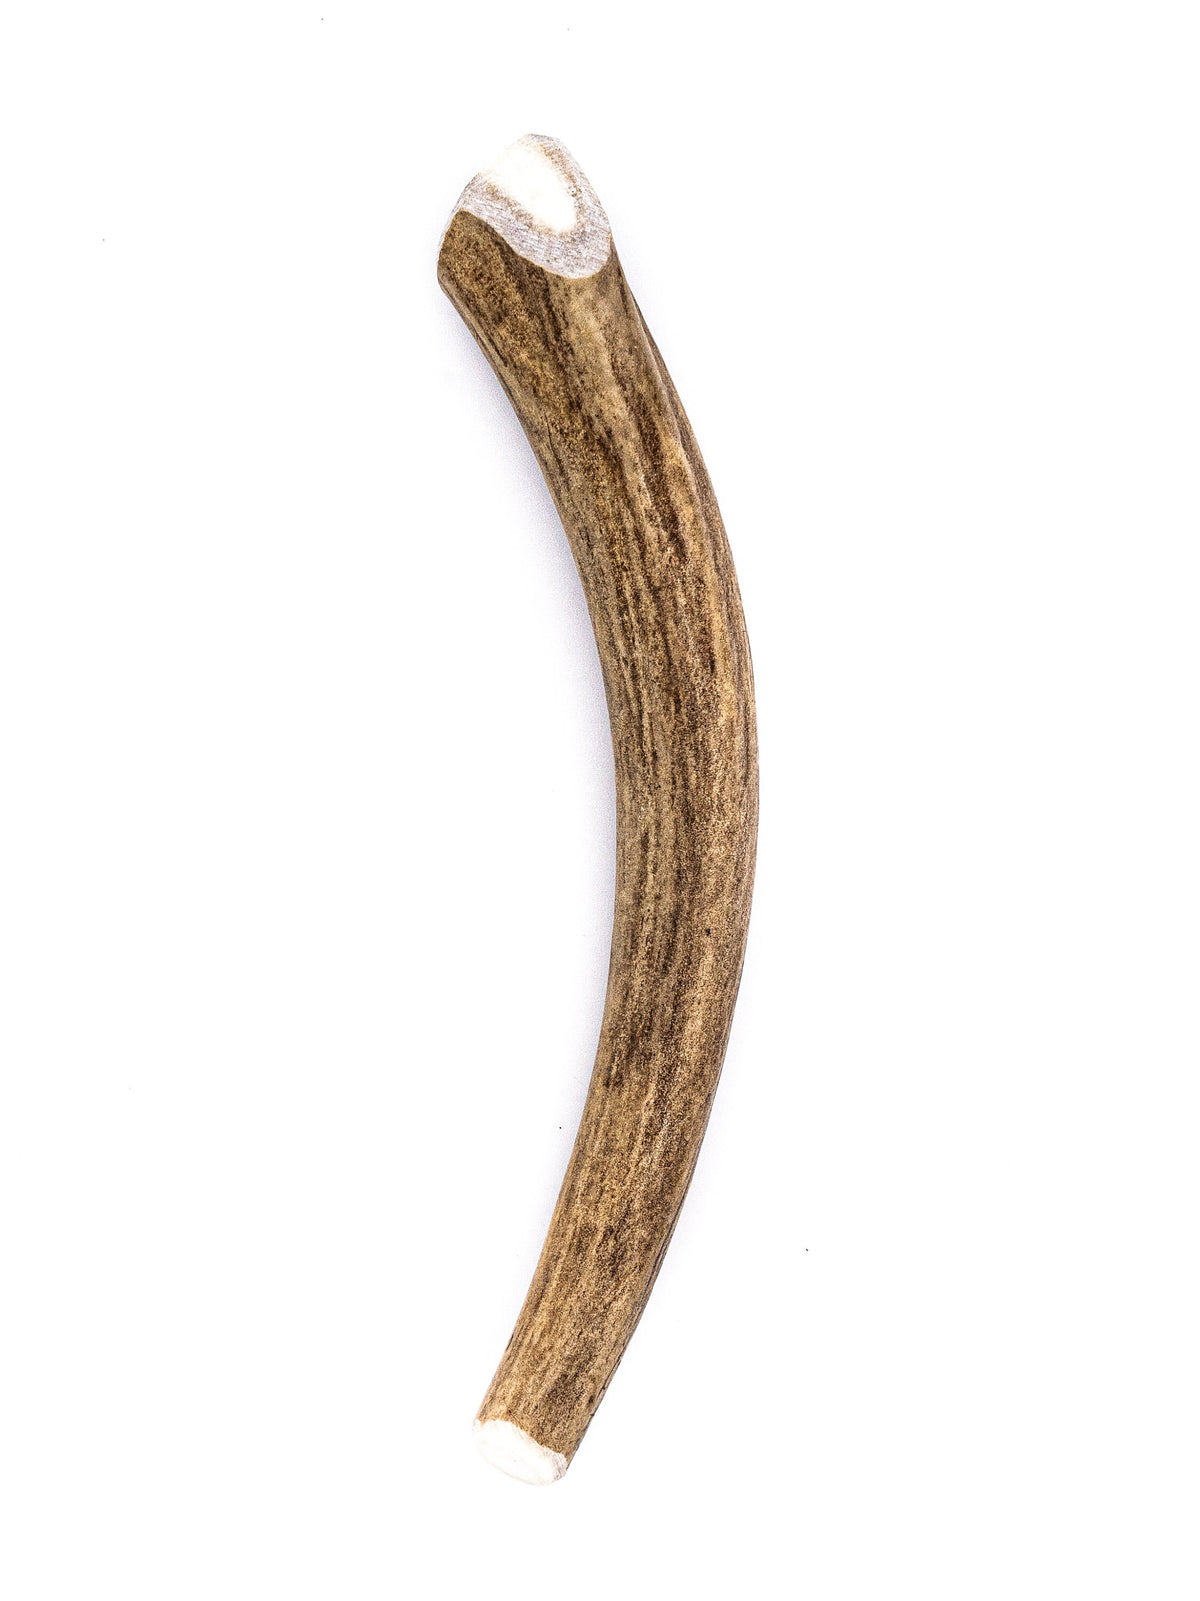 Deer Antler Dog Chew - All Natural, Grade A, Premium Antler Dog Treats, Organic Dog Chews, Naturally Shed Antlers from USA